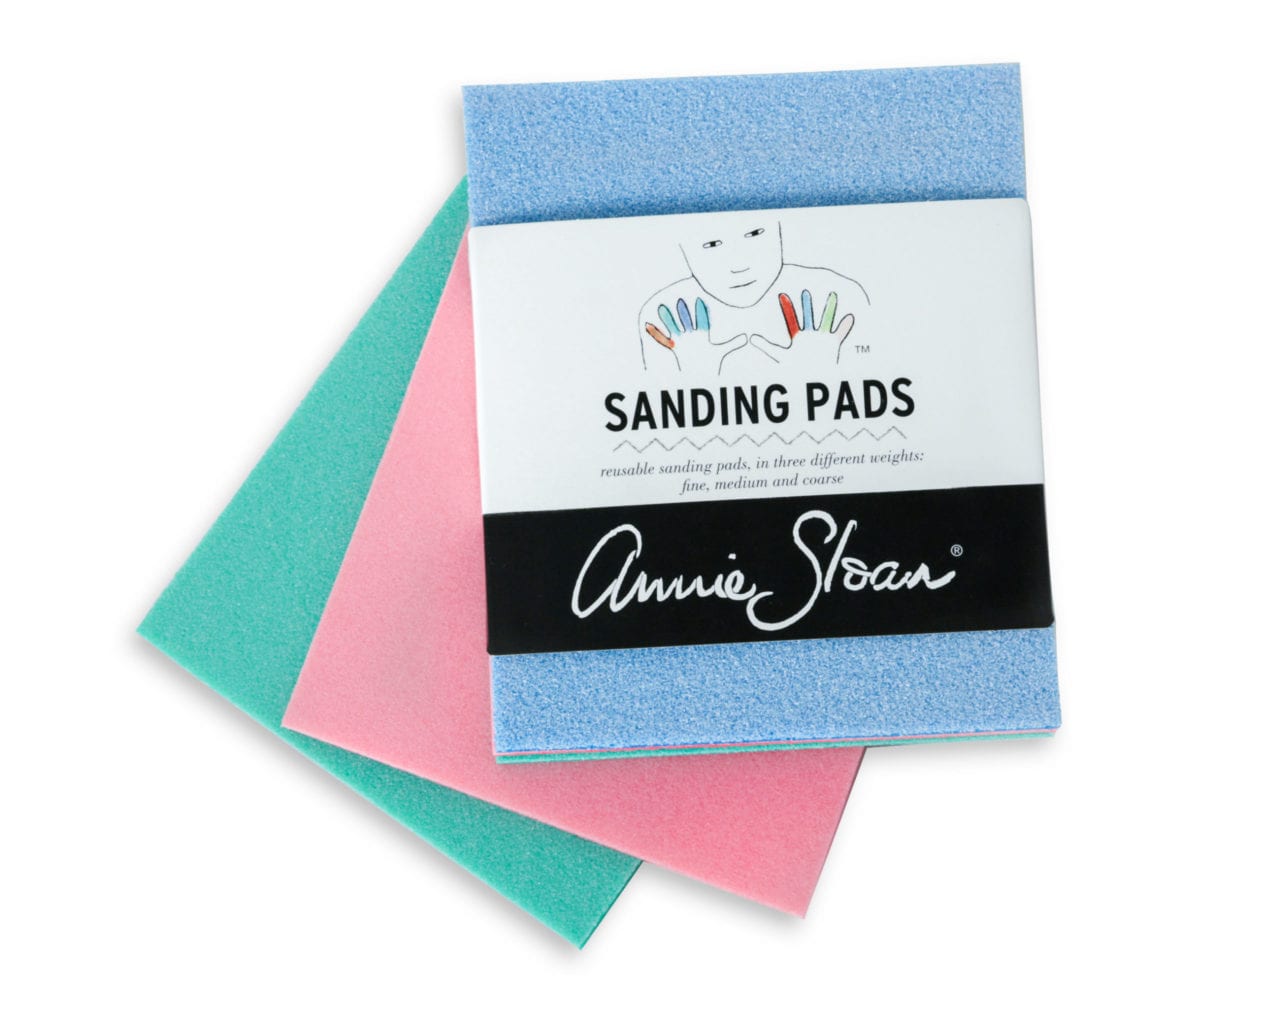 Annie Sloan Sanding Pads pack, including Coarse, Medium and Fine